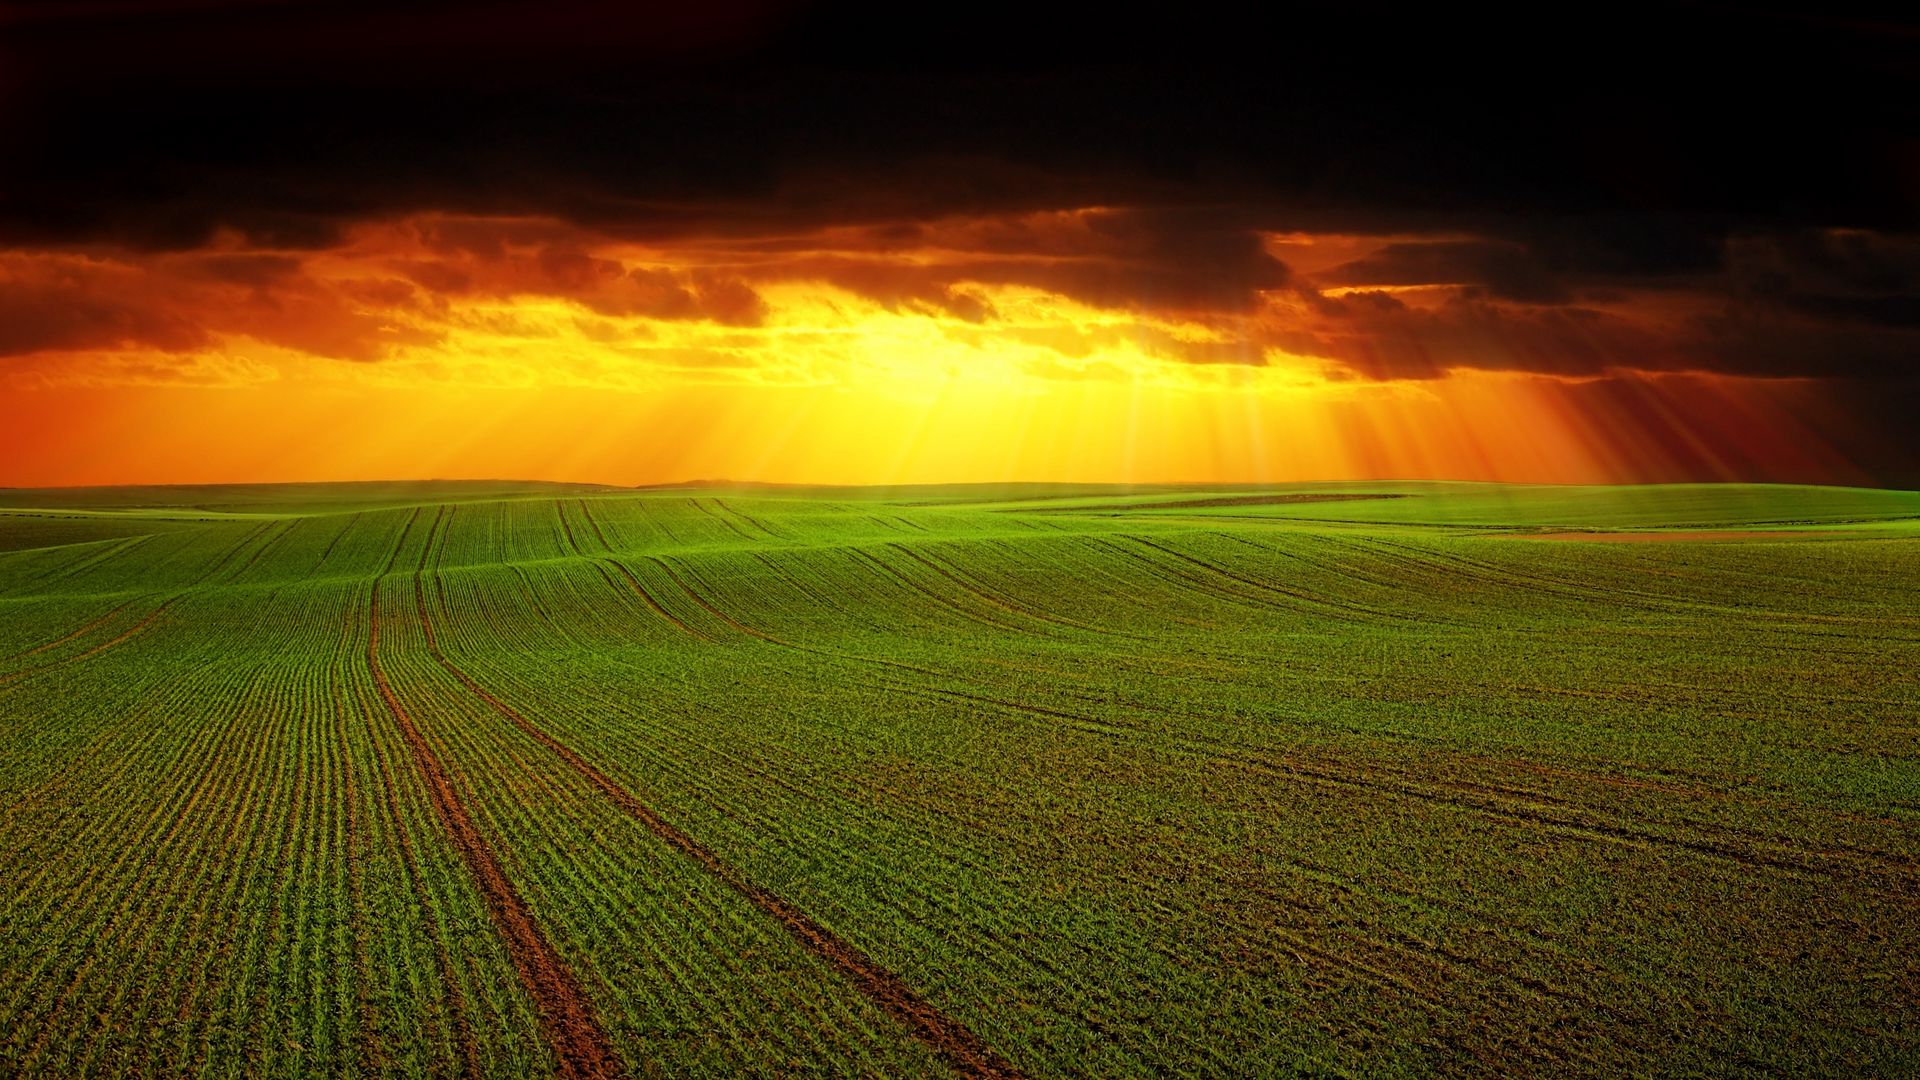 Download wallpaper 1920x1080 field, clouds, horizon, grass, agriculture  full hd, hdtv, fhd, 1080p hd background